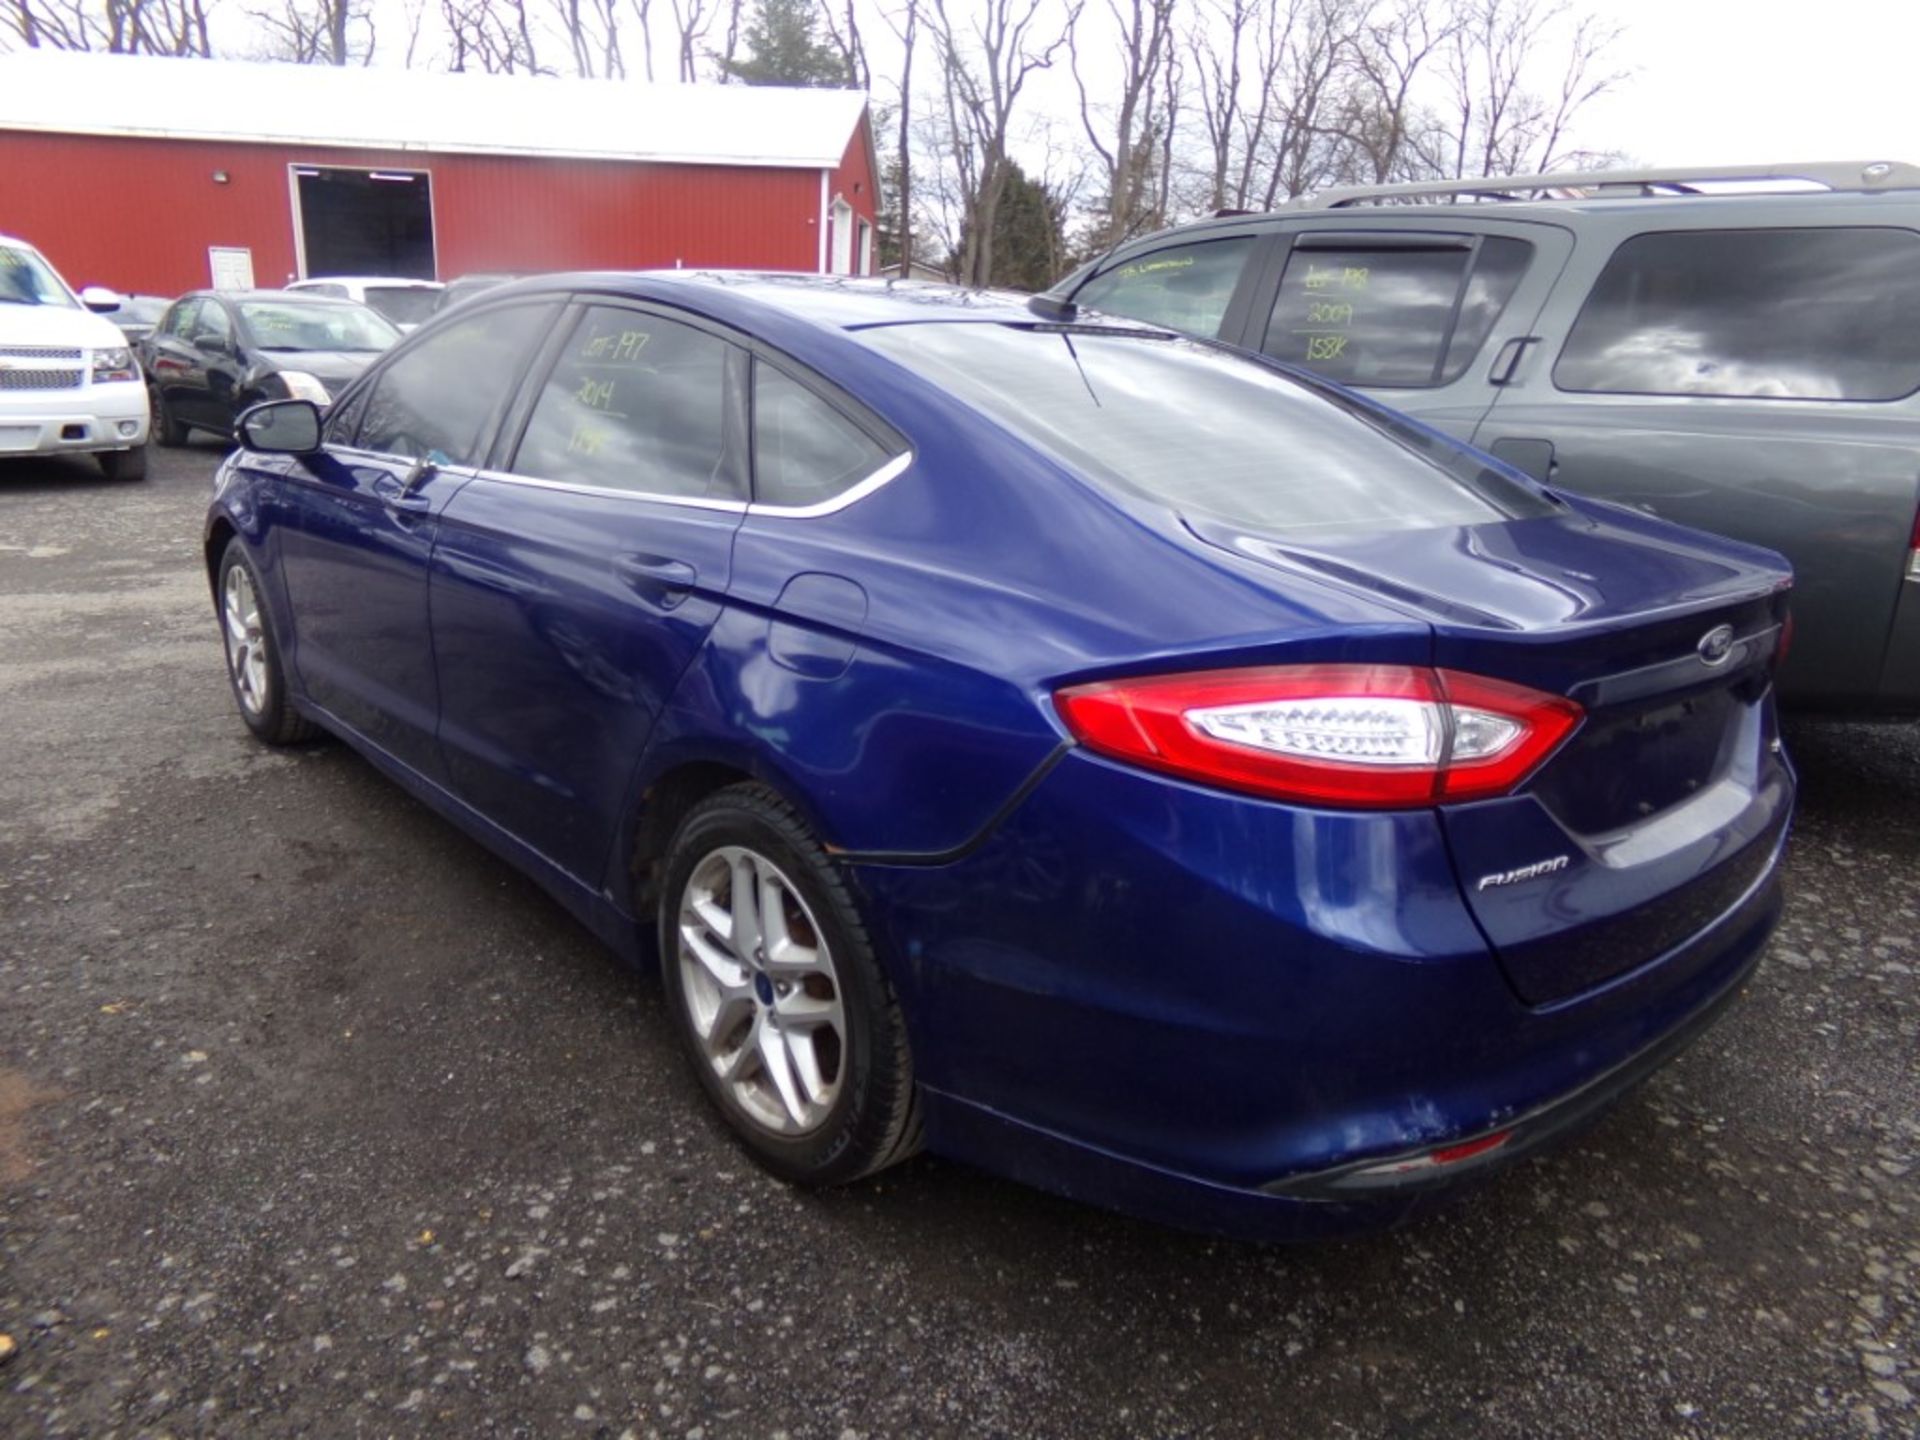 2014 Ford Fusion SE, Blue, 174,739 Miles, VIN#1FA6P0H7XE5365423, AIR BAG LIGHT IS ON, MINOR DAMAGE - Image 2 of 18